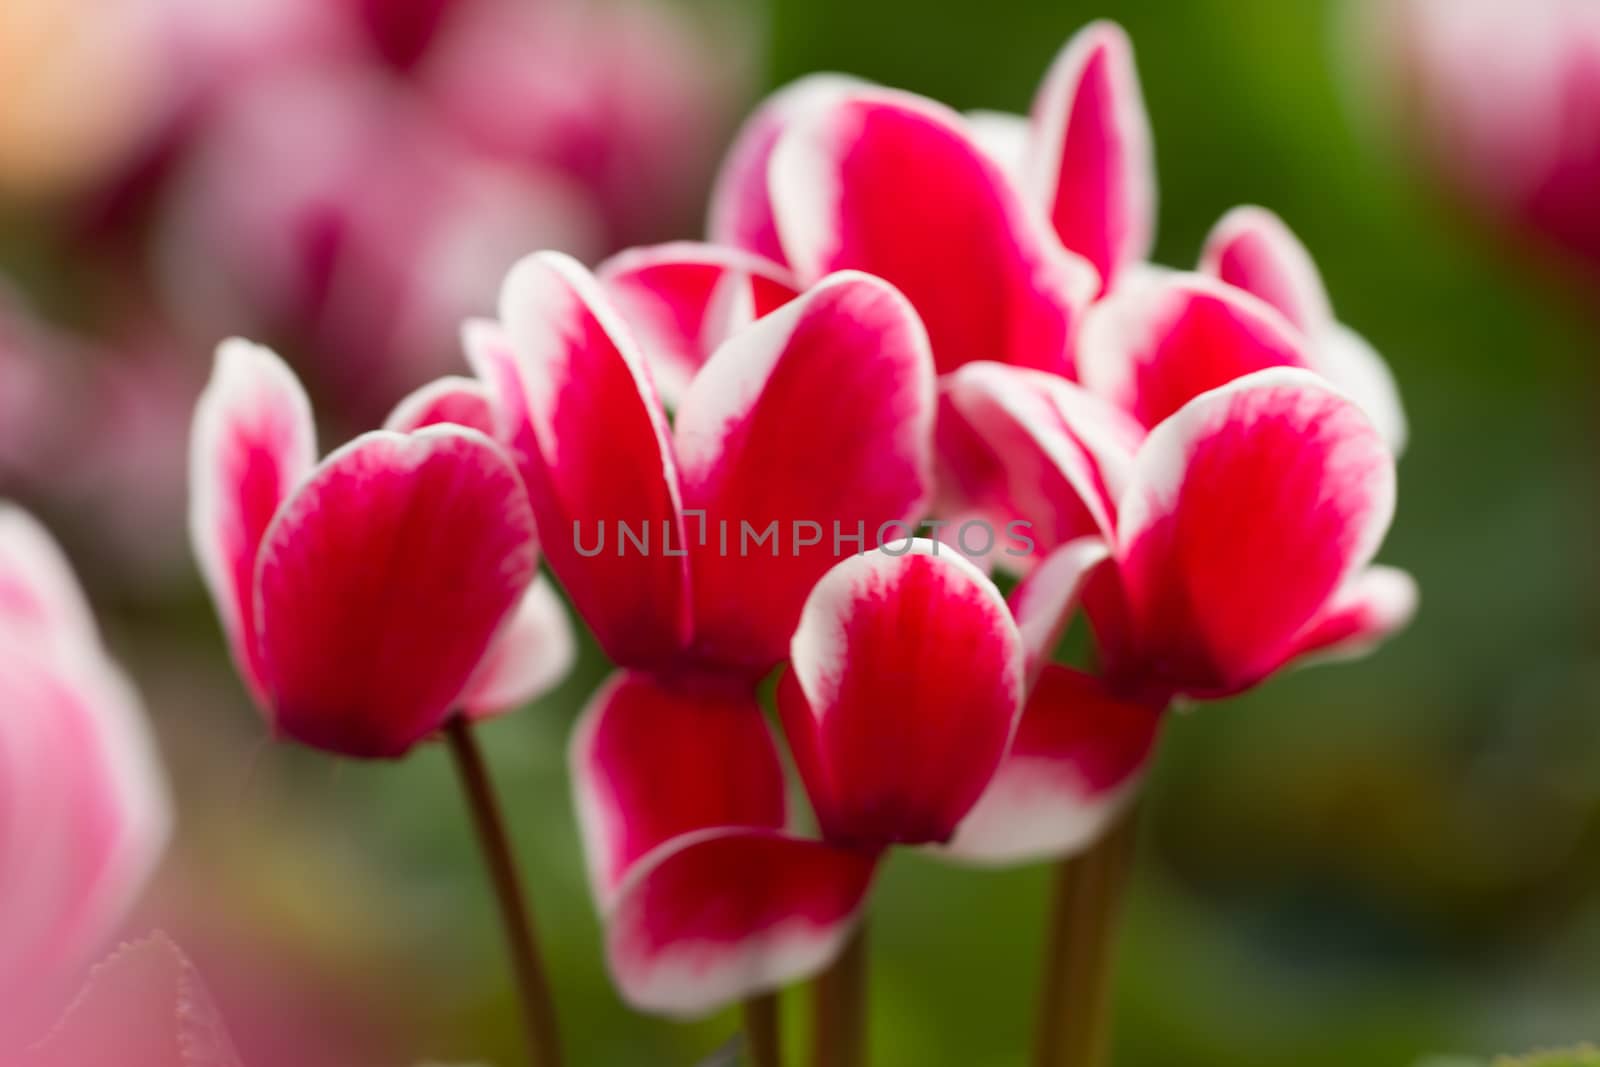 Red and White Tulips in the morning light